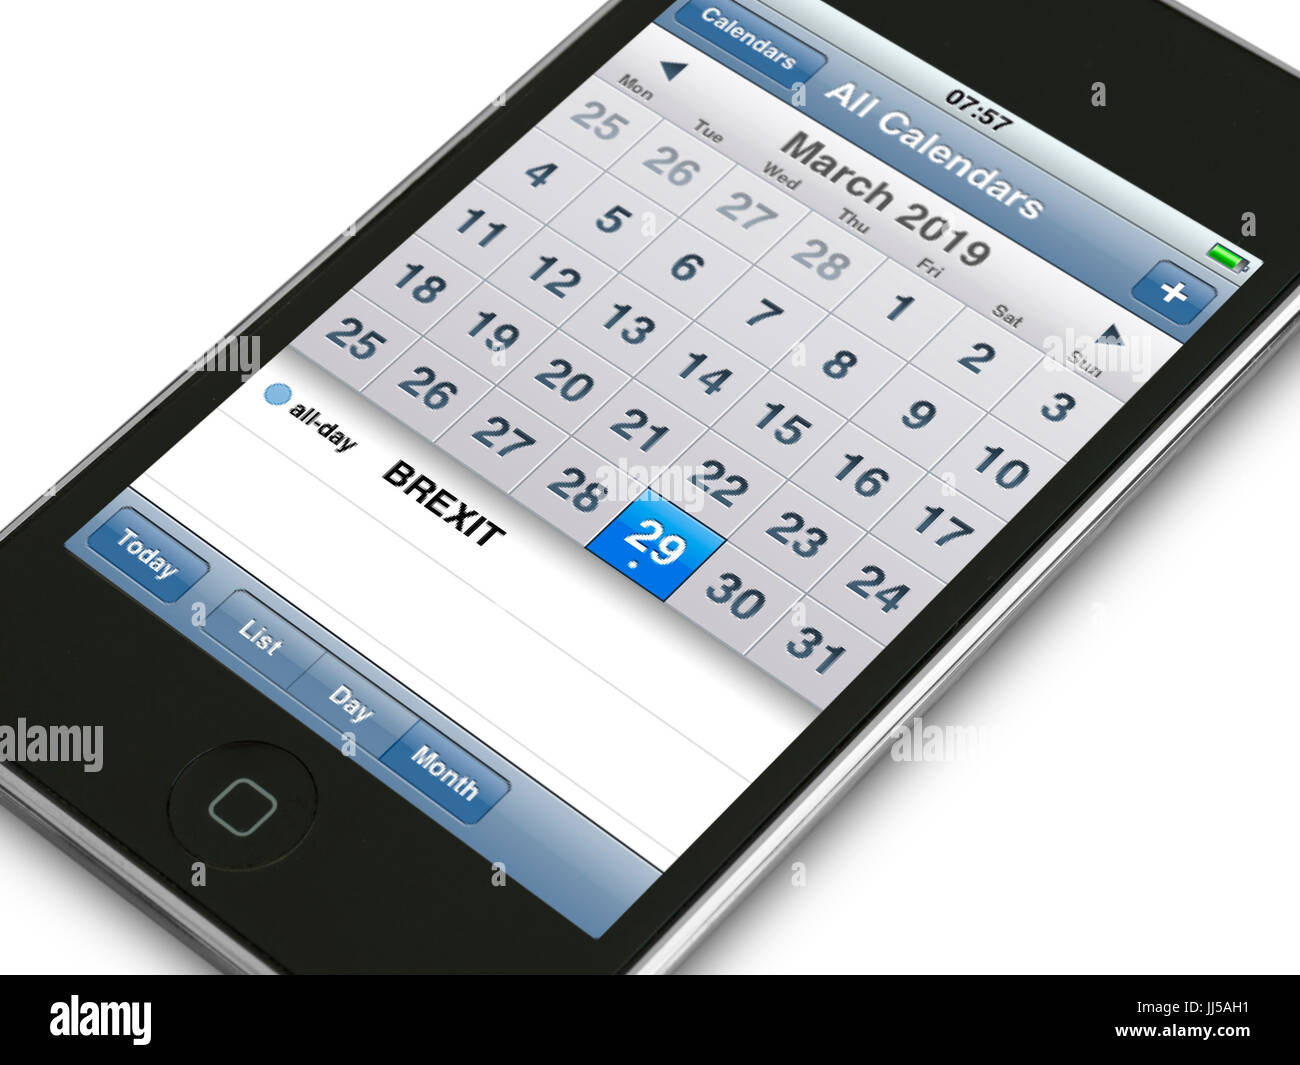 Mobile phone device showing calendar diary event for Brexit date when the UK is due to leave the EU European Union ('Independence day') Stock Photo